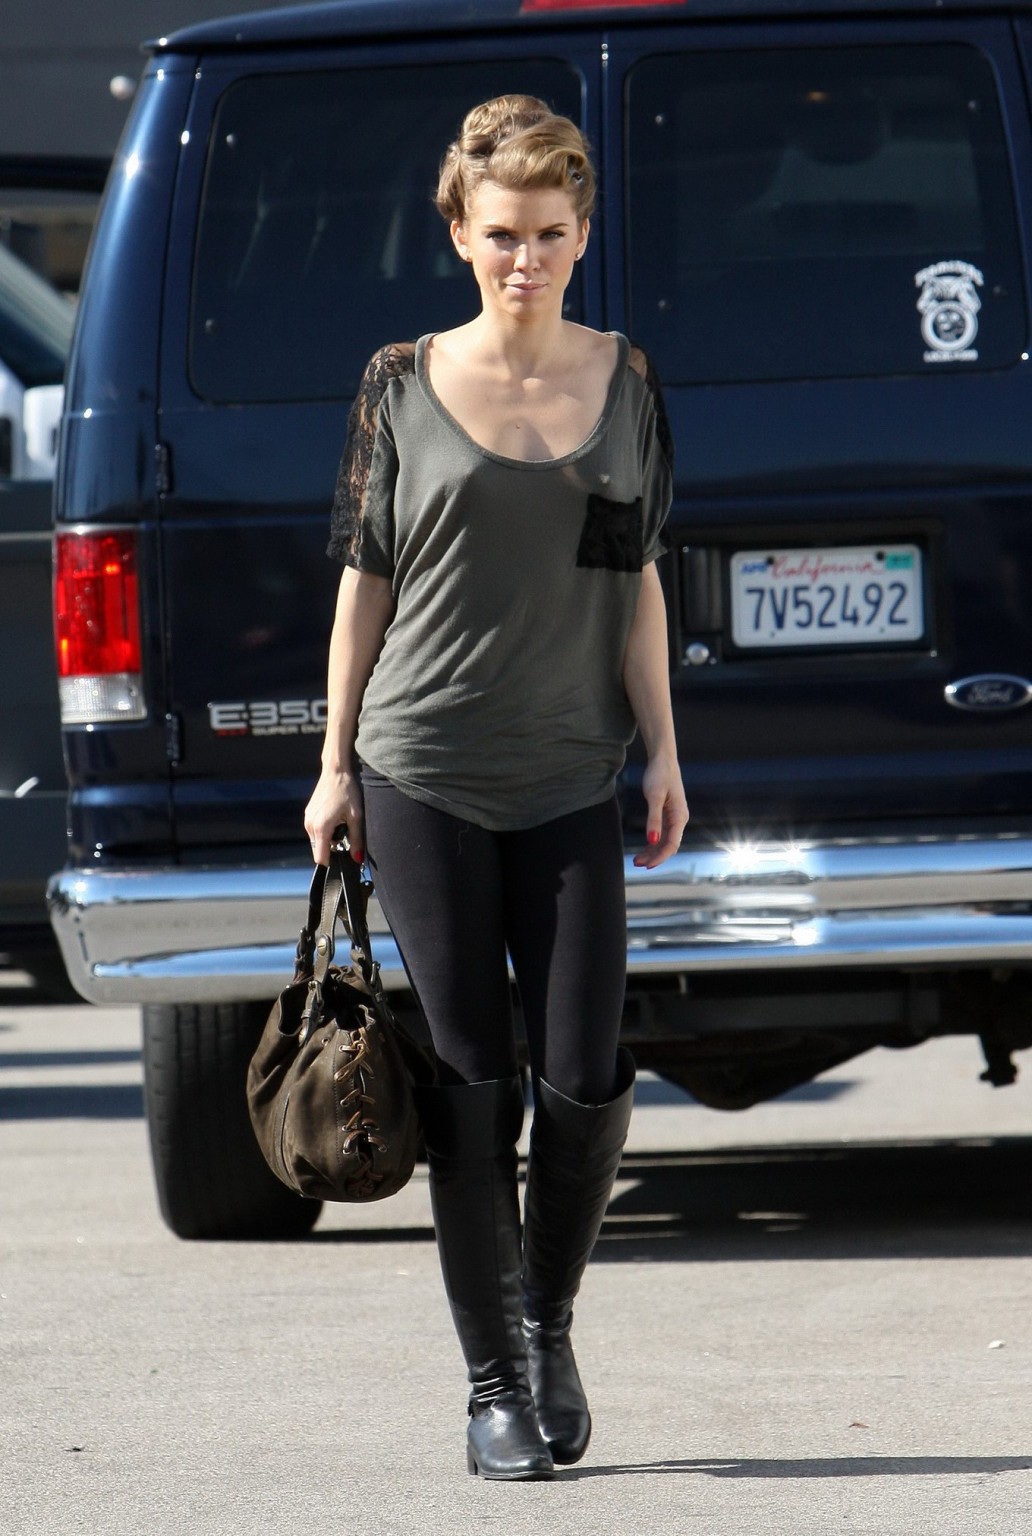 AnnaLynne McCord braless wearing see through top on the '90210' set in LA #75281621